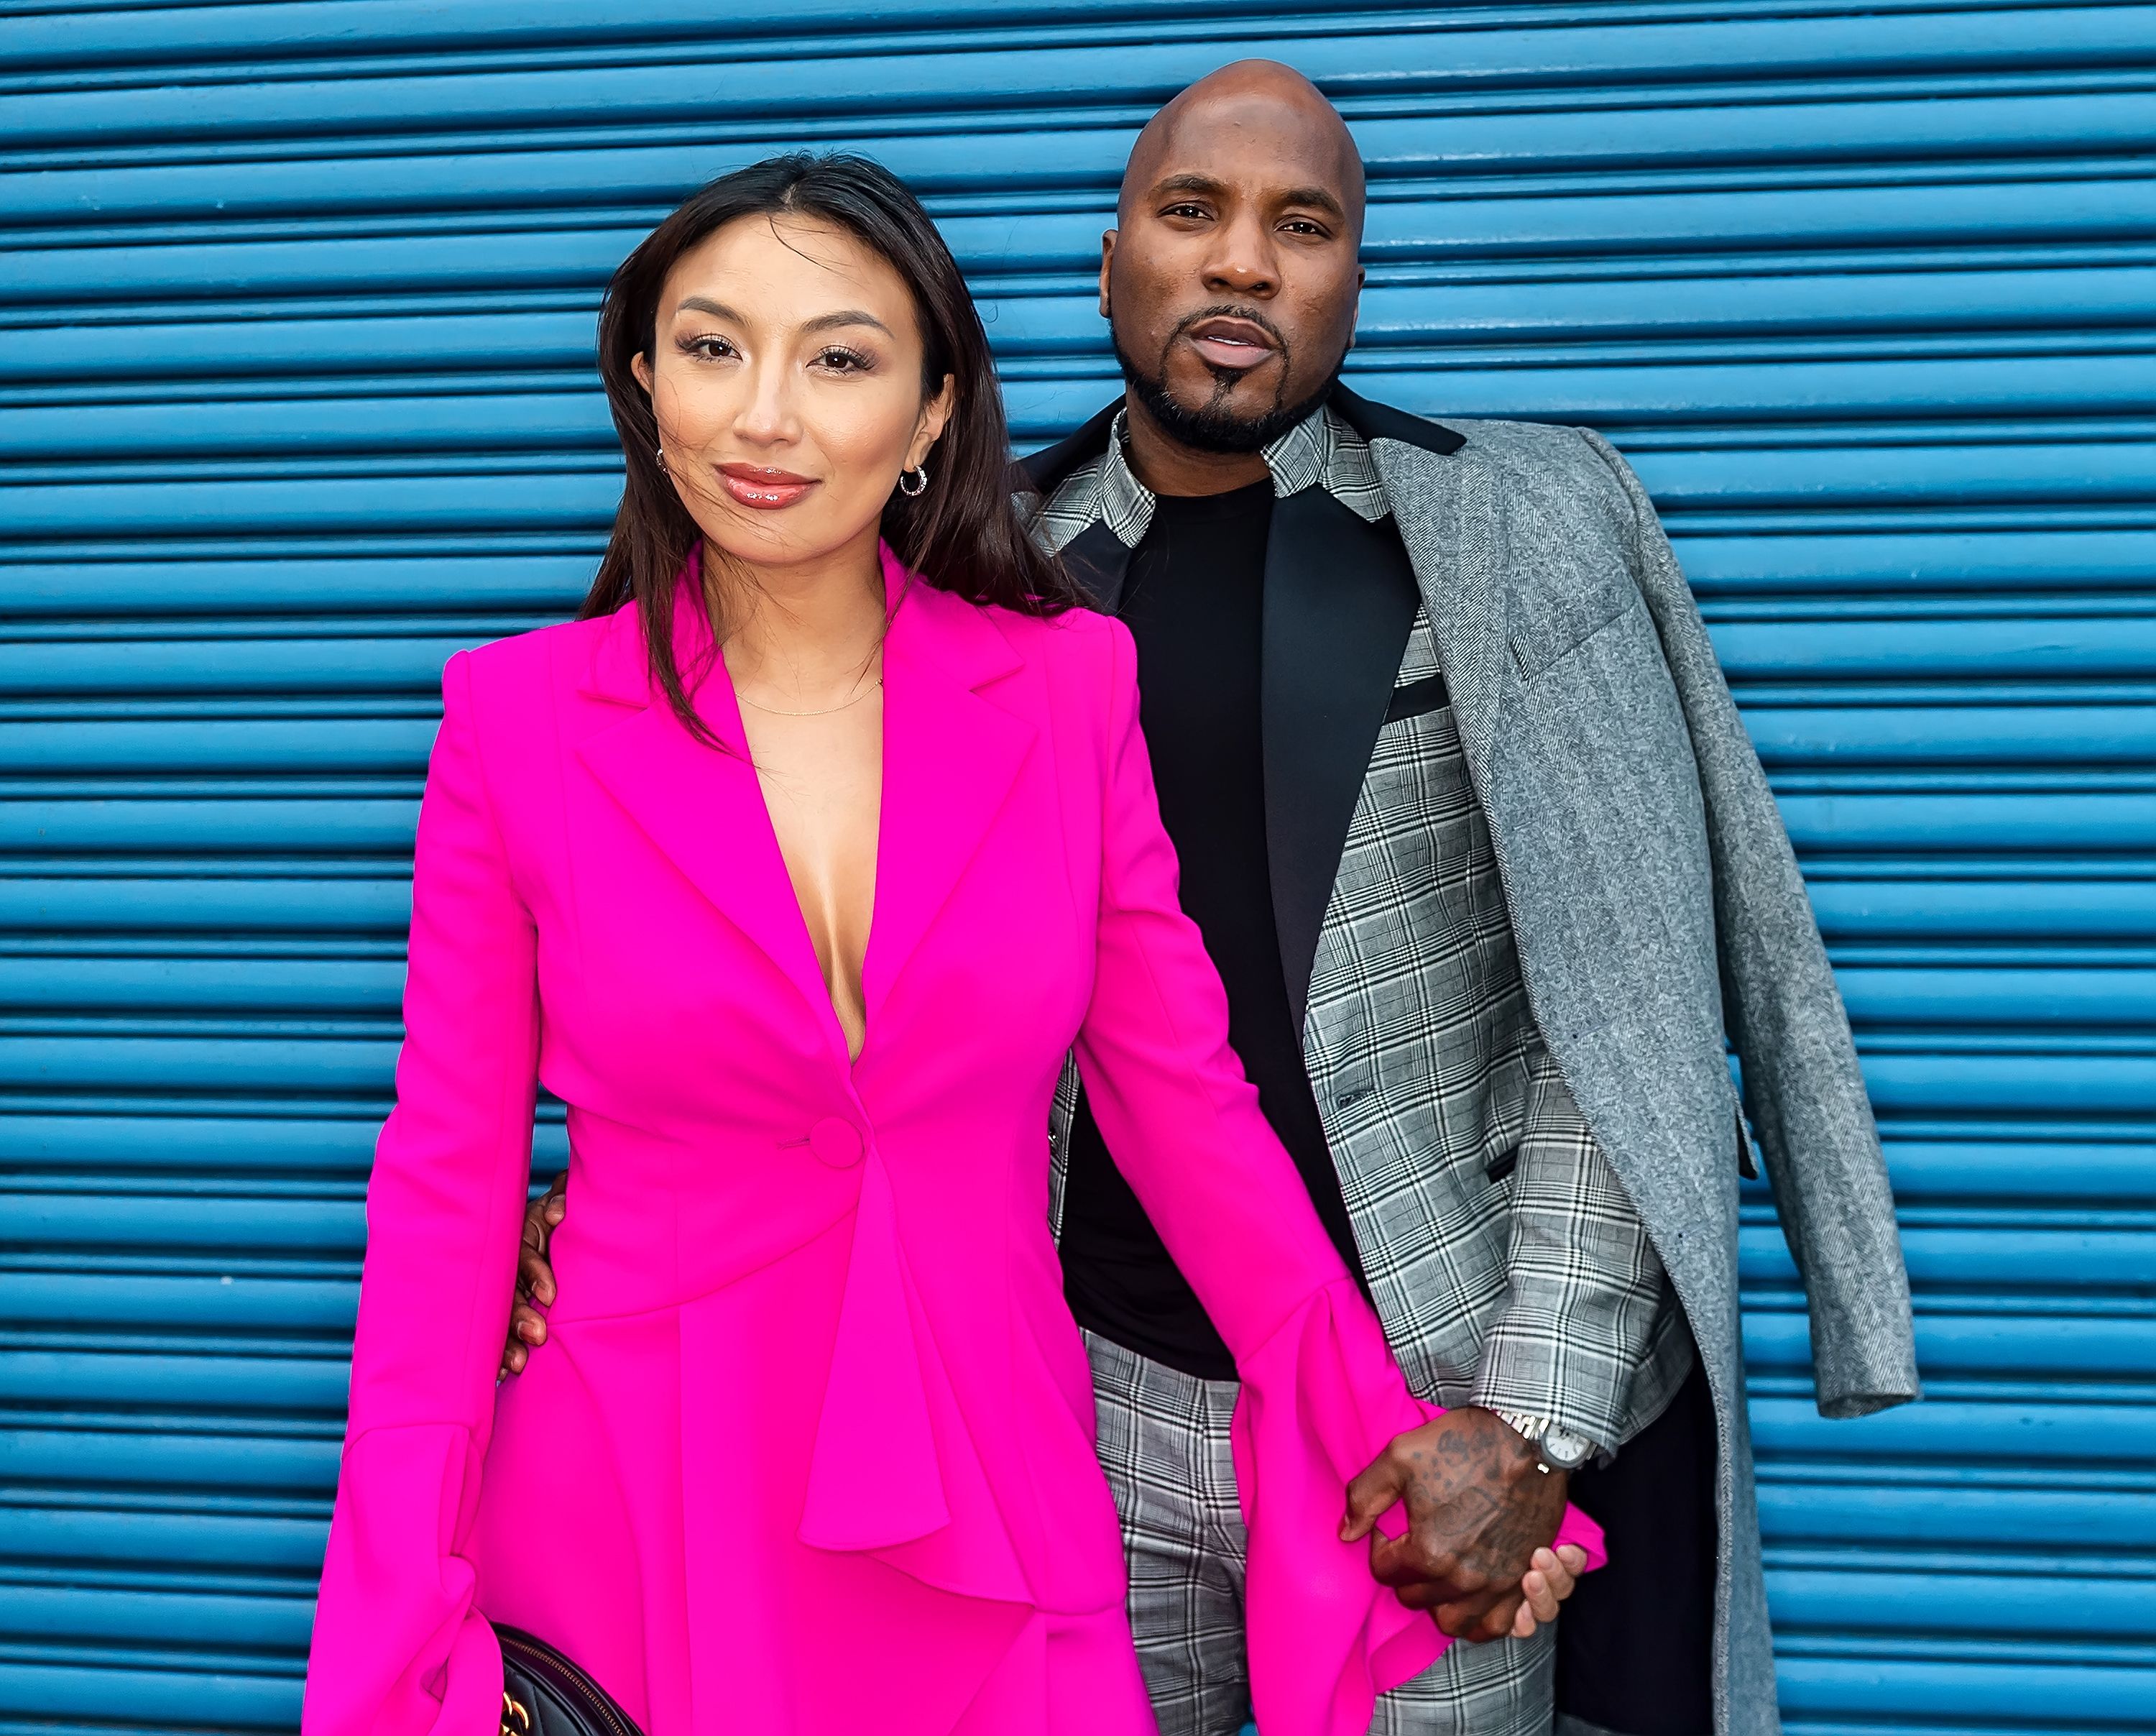 Jeannie Mai and rapper Jeezy at New York Fashion Week at Pier 59 Studios on February 07, 2020. | Source: Getty Images